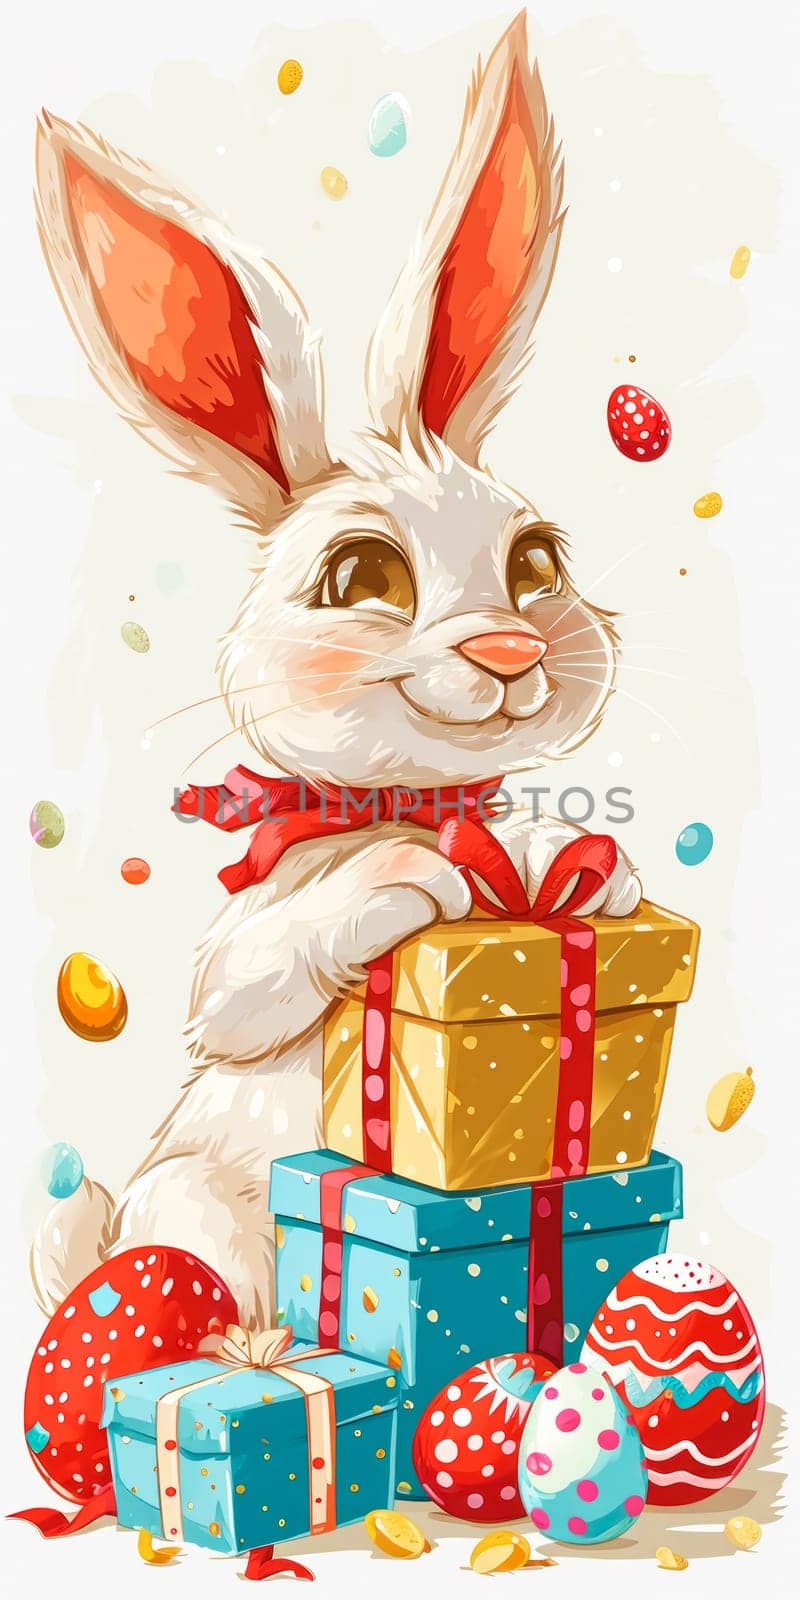 An exuberant Easter illustration captures a white bunny with vibrant ears, clutching a gift box, surrounded by a variety of colorful, patterned Easter eggs